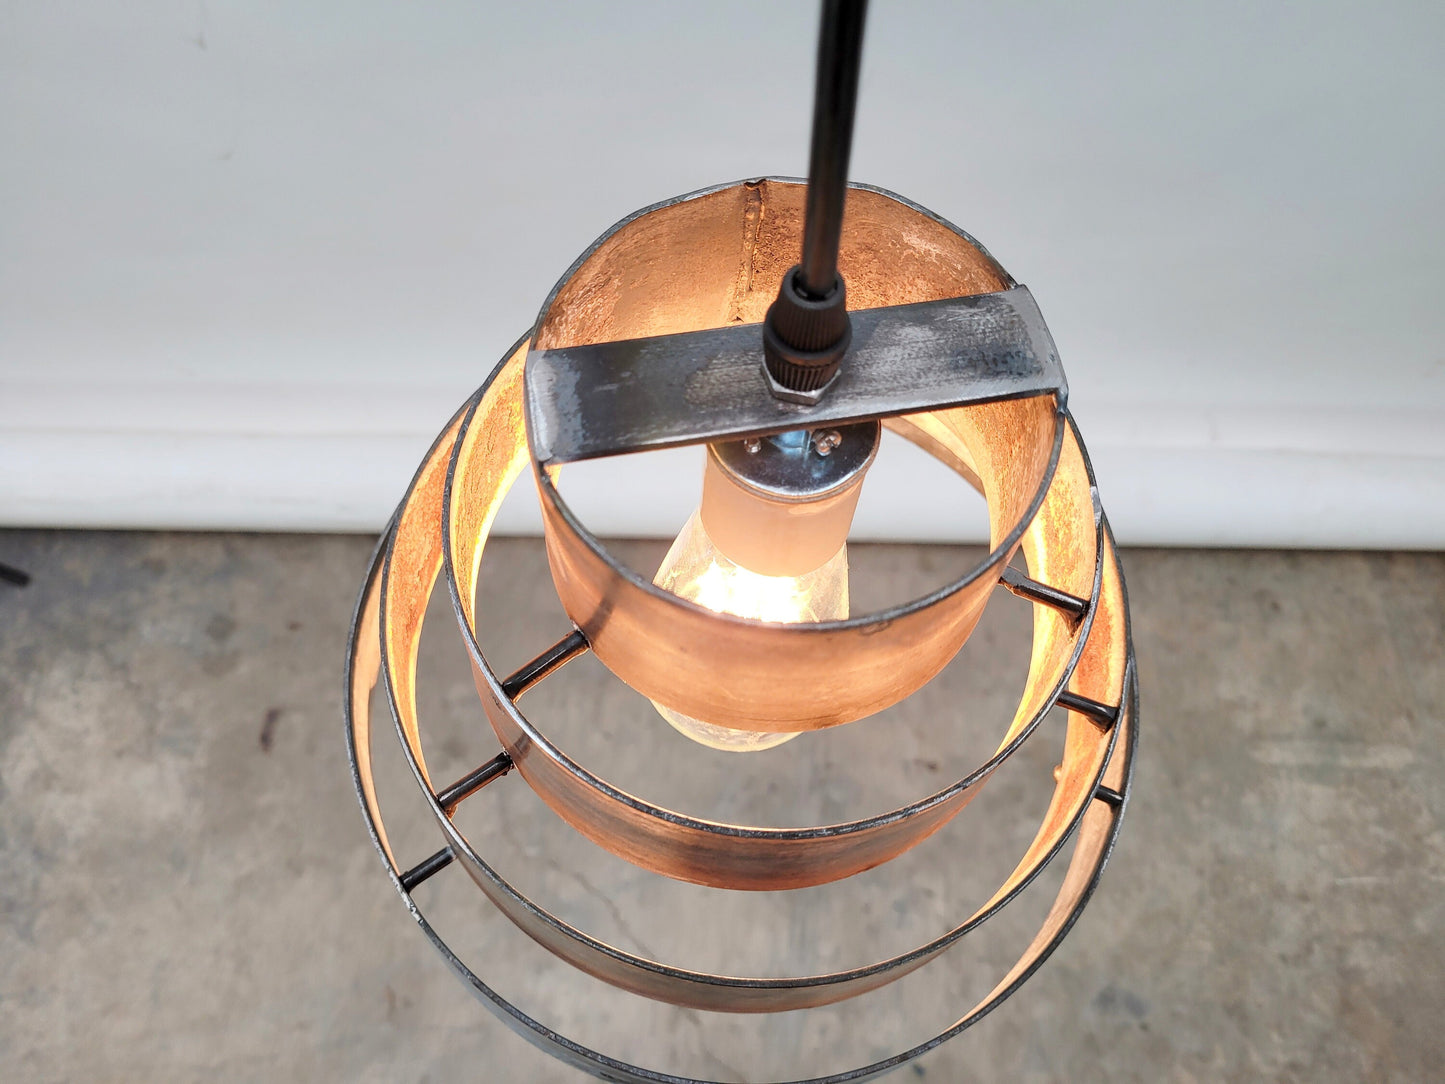 Wine Barrel Ring Pendant Light - Keilur - Made from Retired California wine barrel rings. 100% Recycled!ings 100% Recycled!